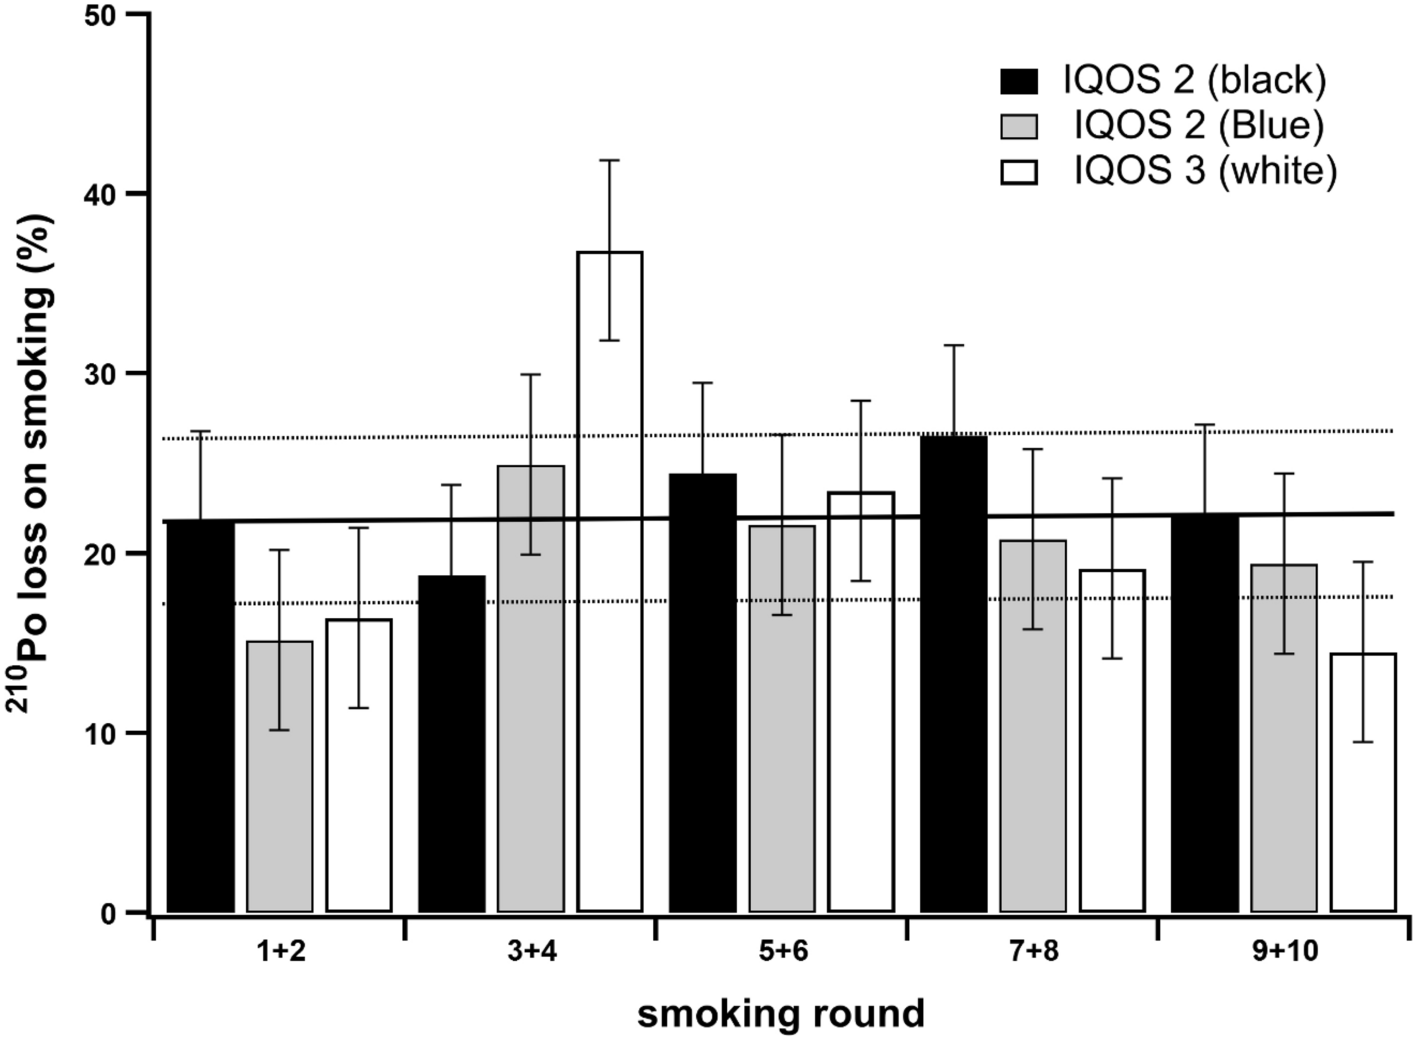 210Po and 210Pb content in the smoke of Heated Tobacco Products